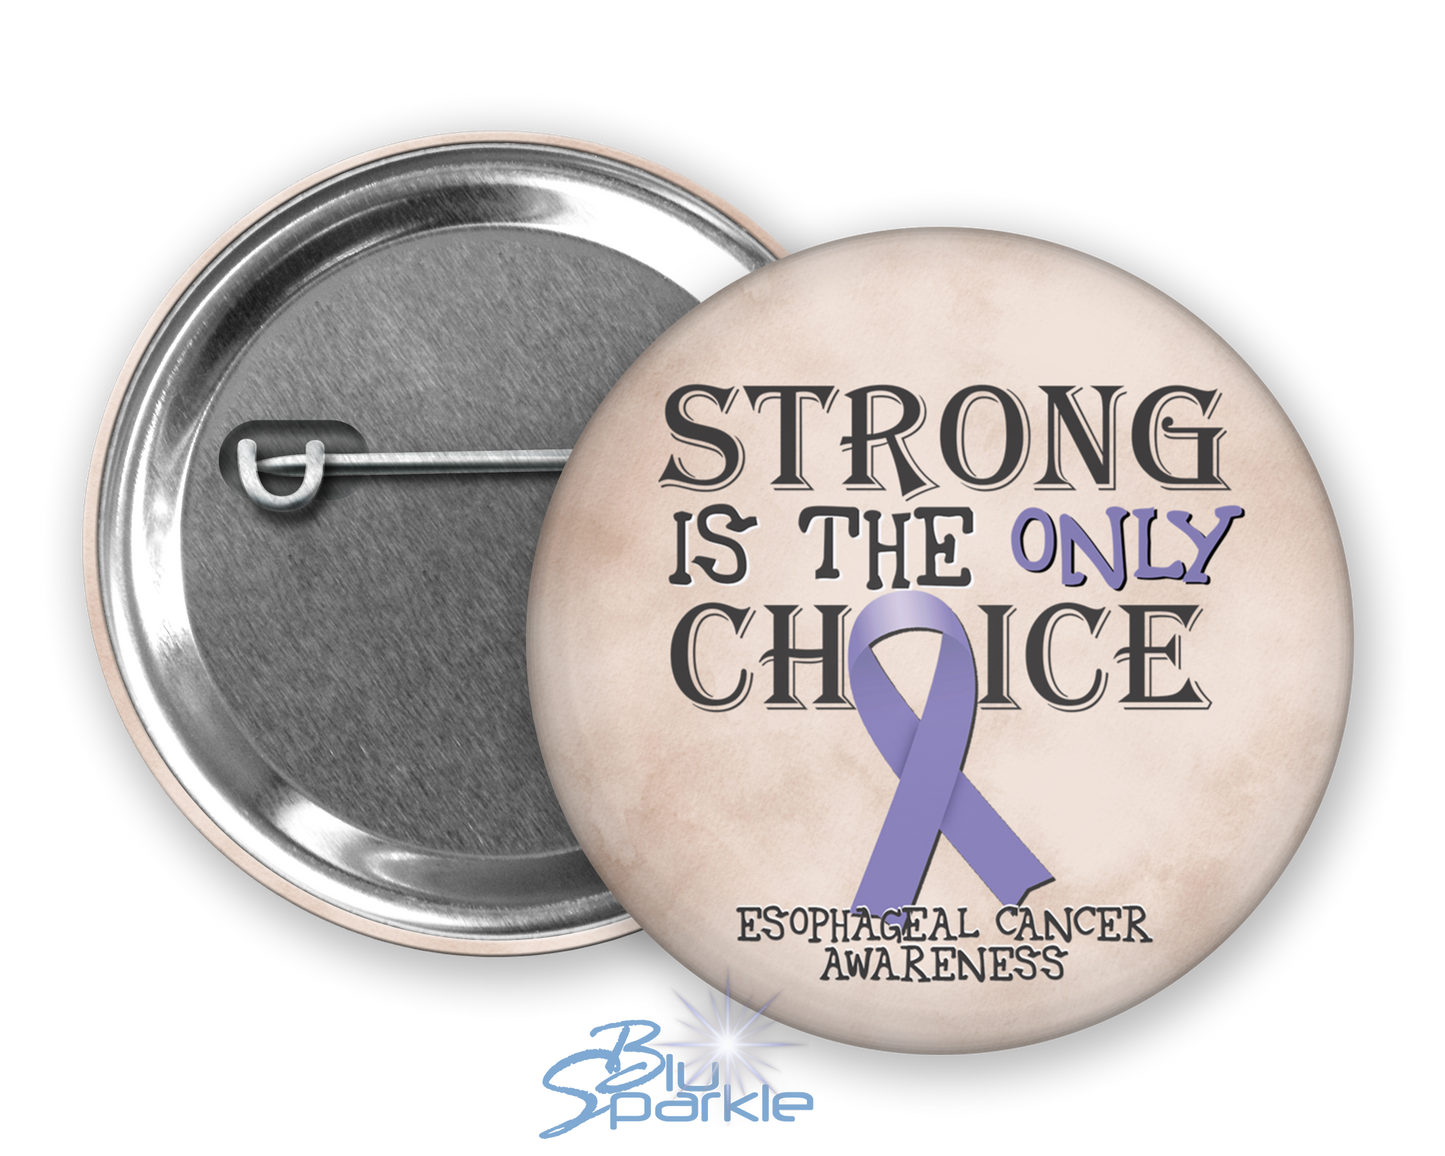 Strong is the Only Choice -Esophageal Cancer Awareness Pinback Button |x|